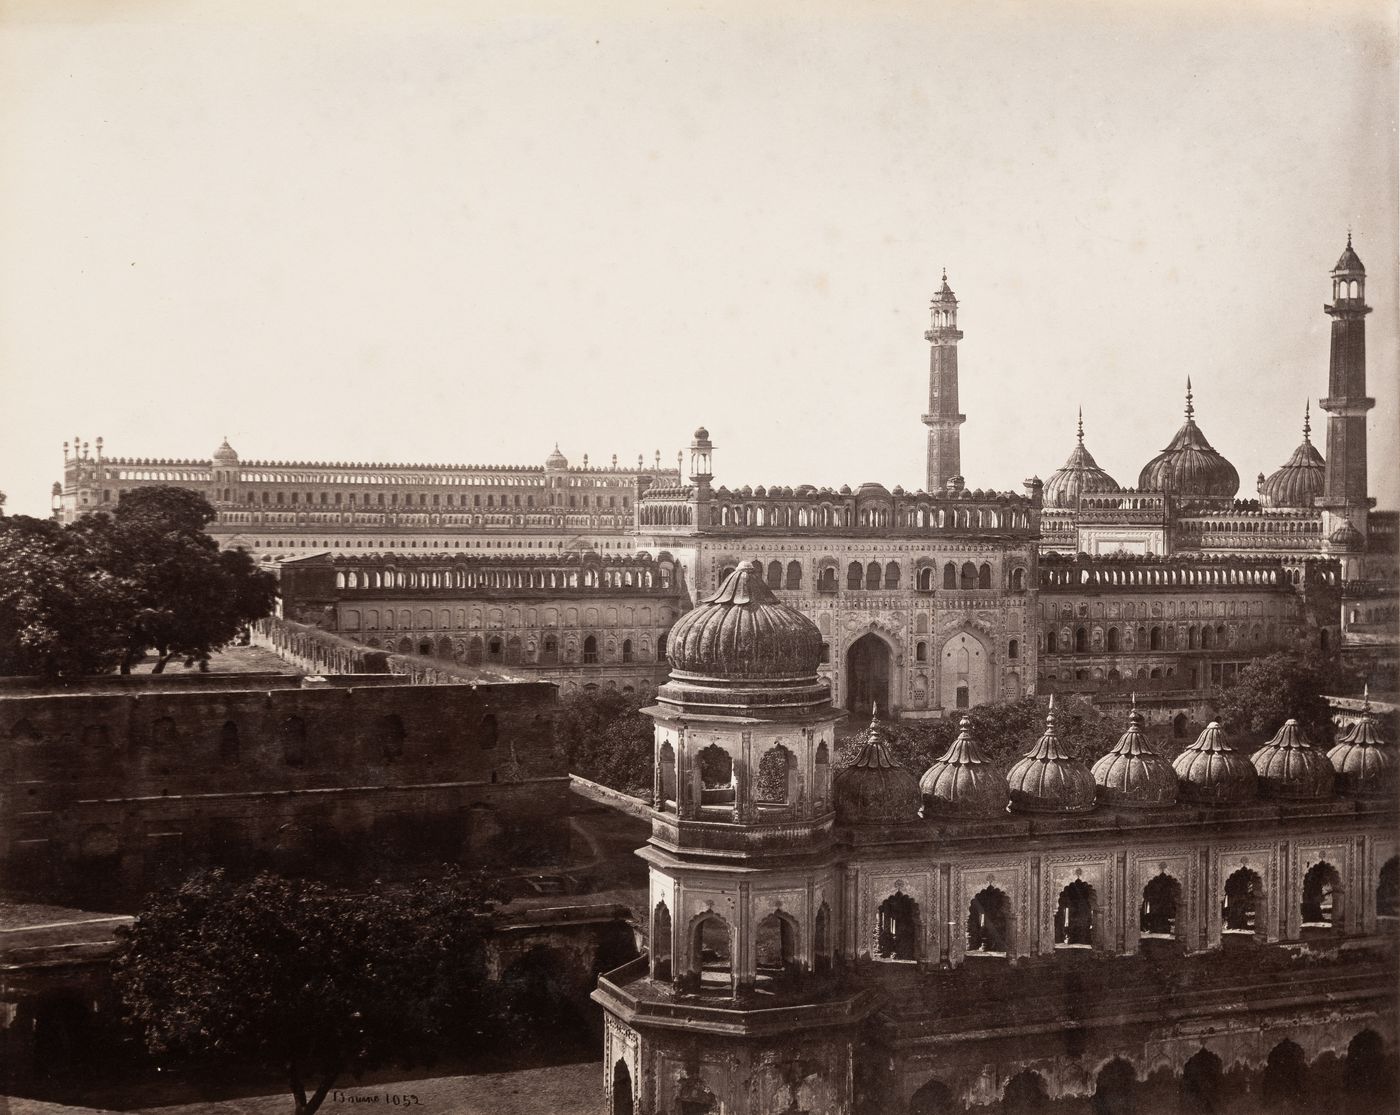 View of the Great Imambara (also known as the Bara Imambara), Lucknow, India